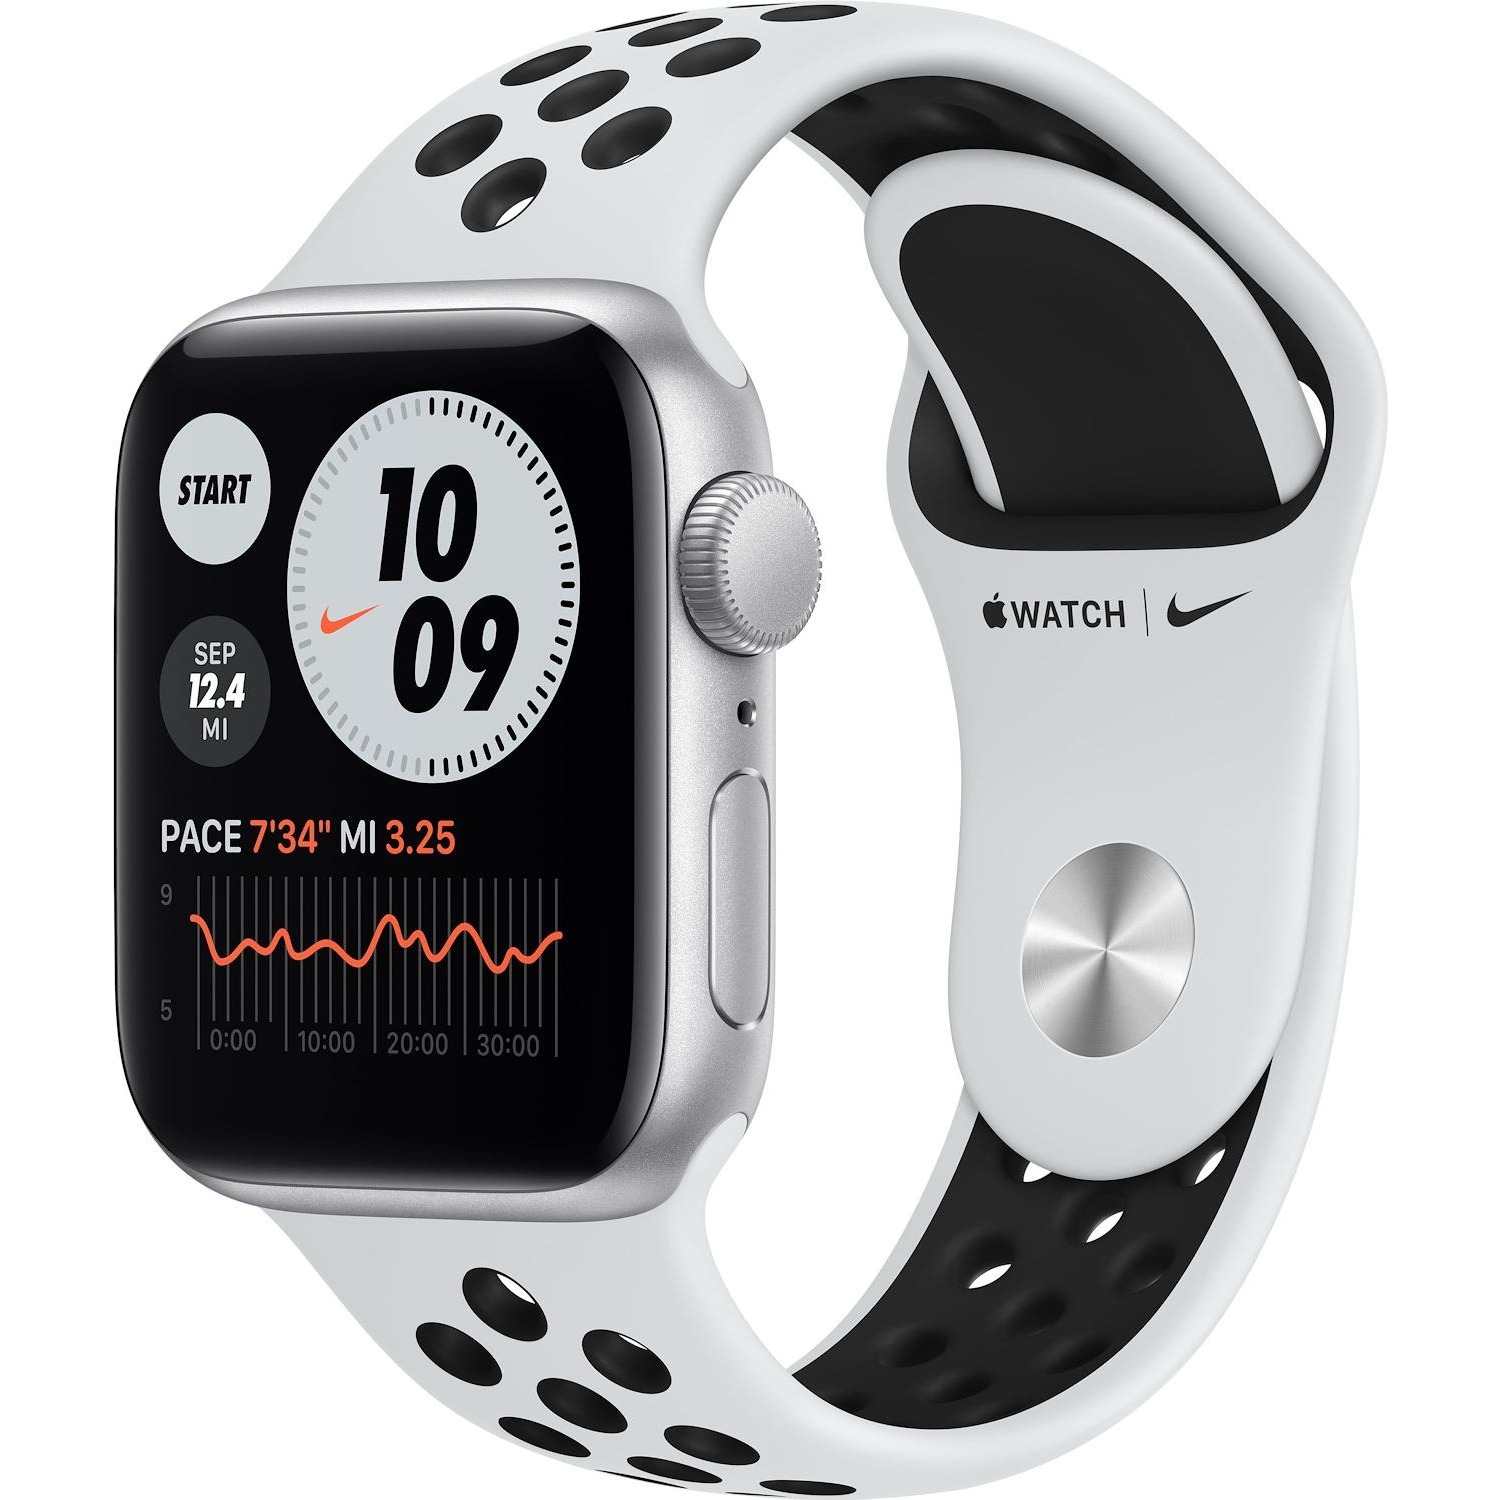 Apple Watch Se - Apple Watch SE is official with affordable price tag